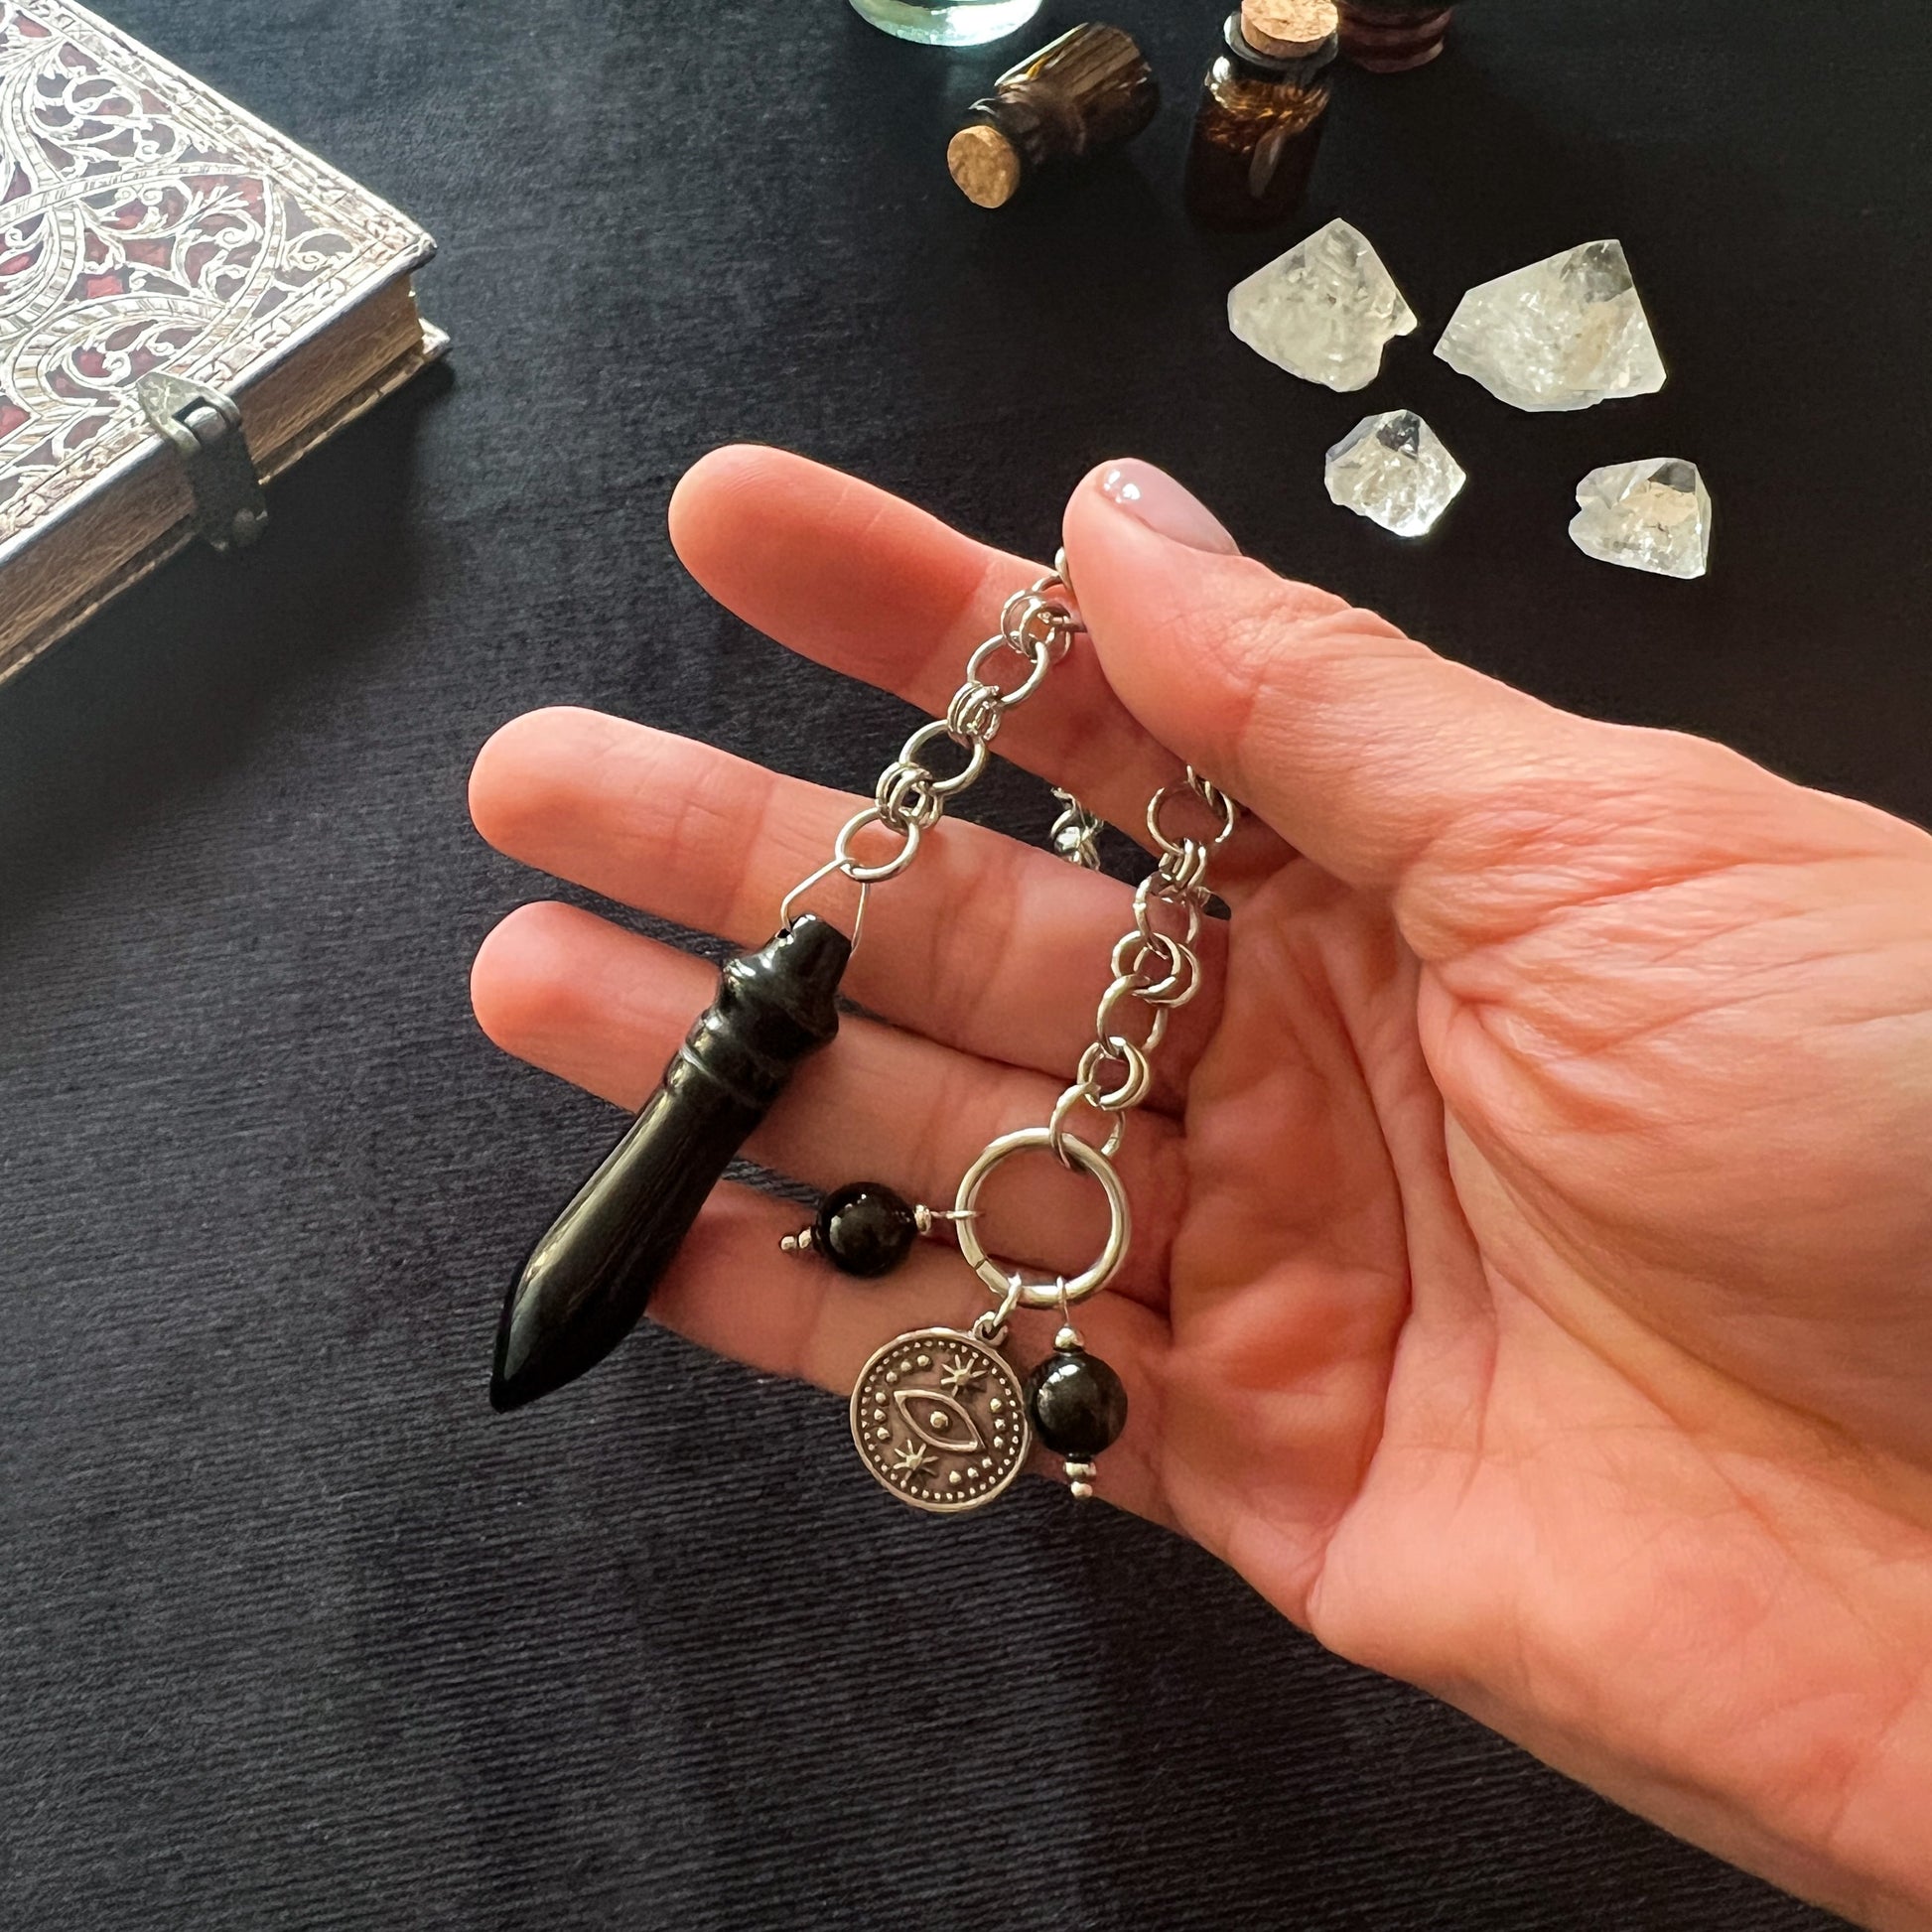 Egyptian Thot pendulum black agate chainmail, third eye charm and stainless steel Baguette Magick